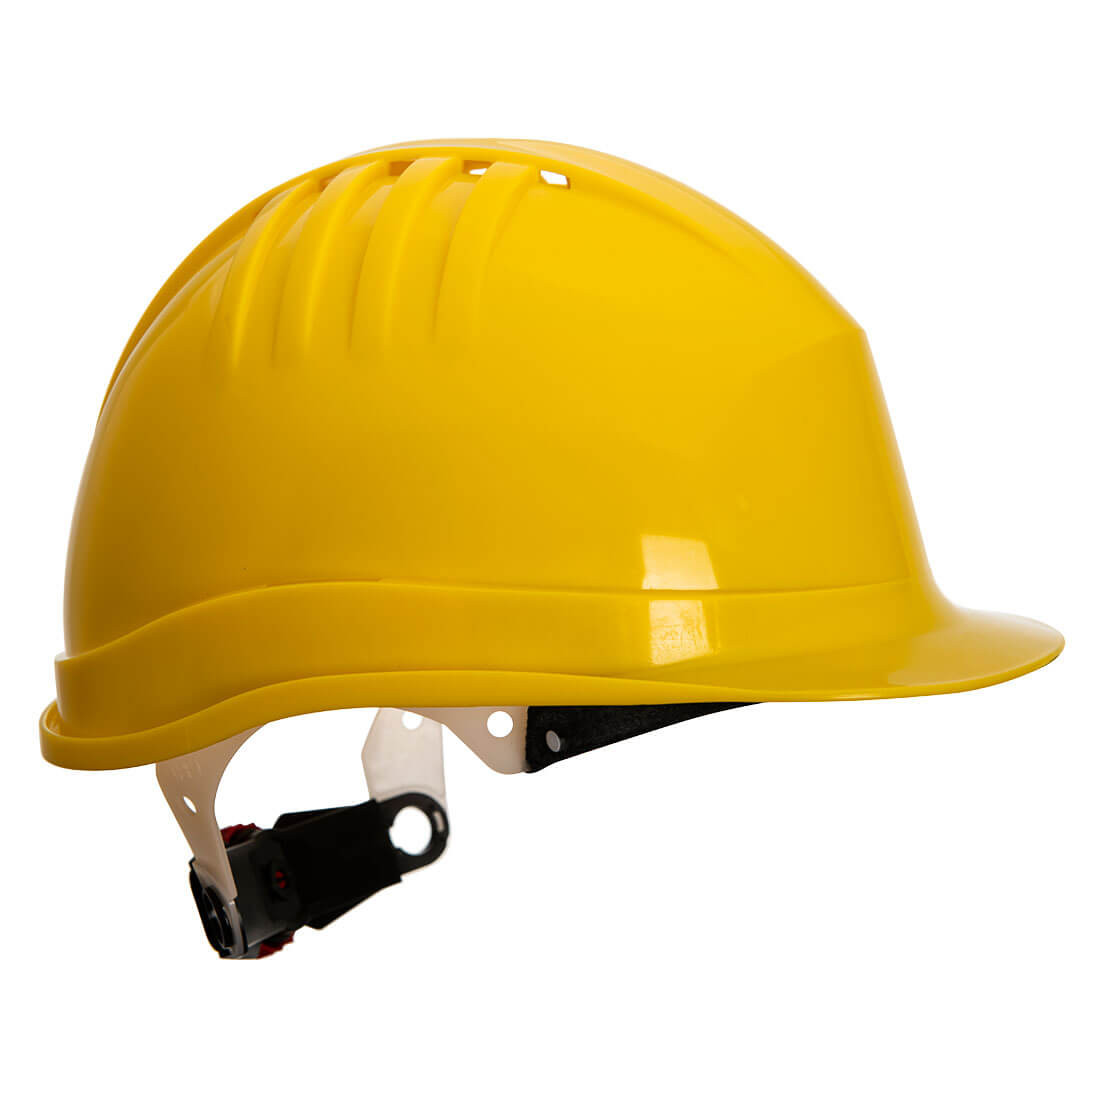 Expertline Safety Helmet - Personal protection